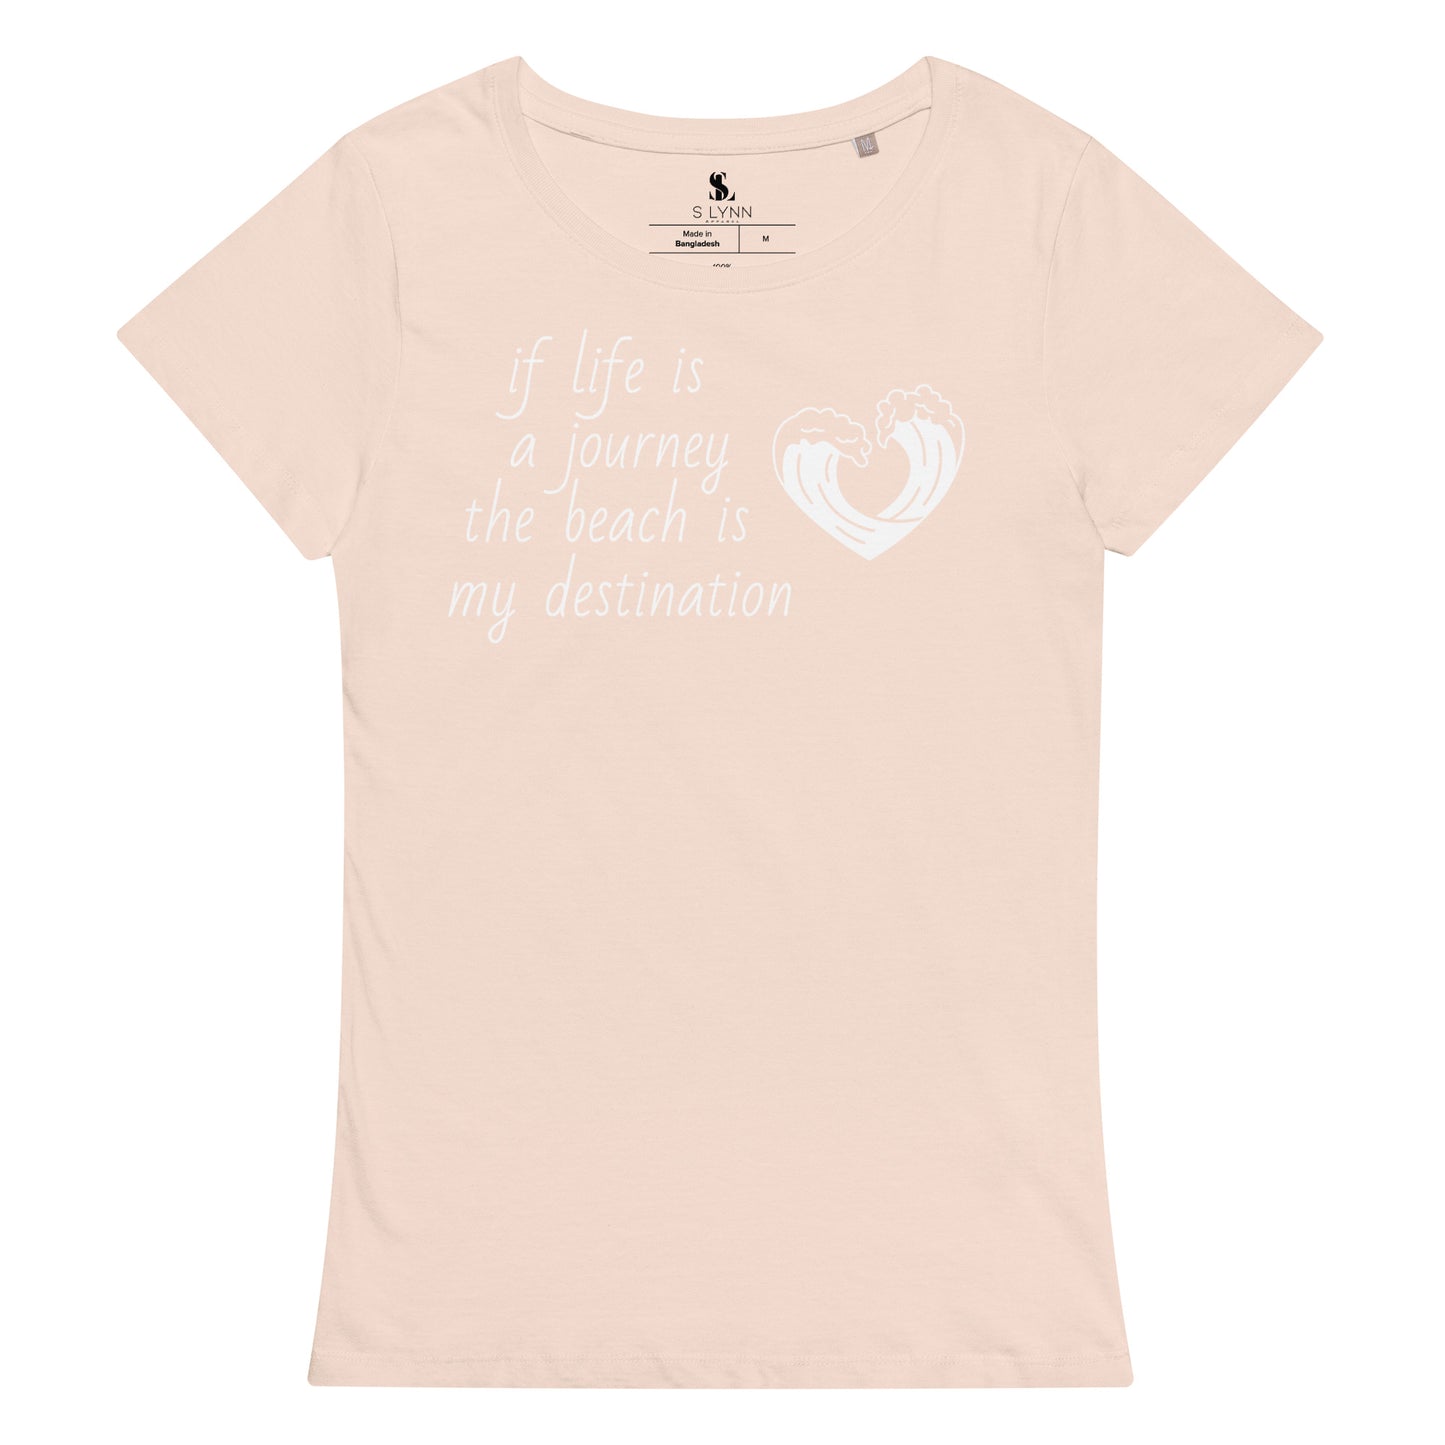 If Life is a Journey Organic T-Shirt